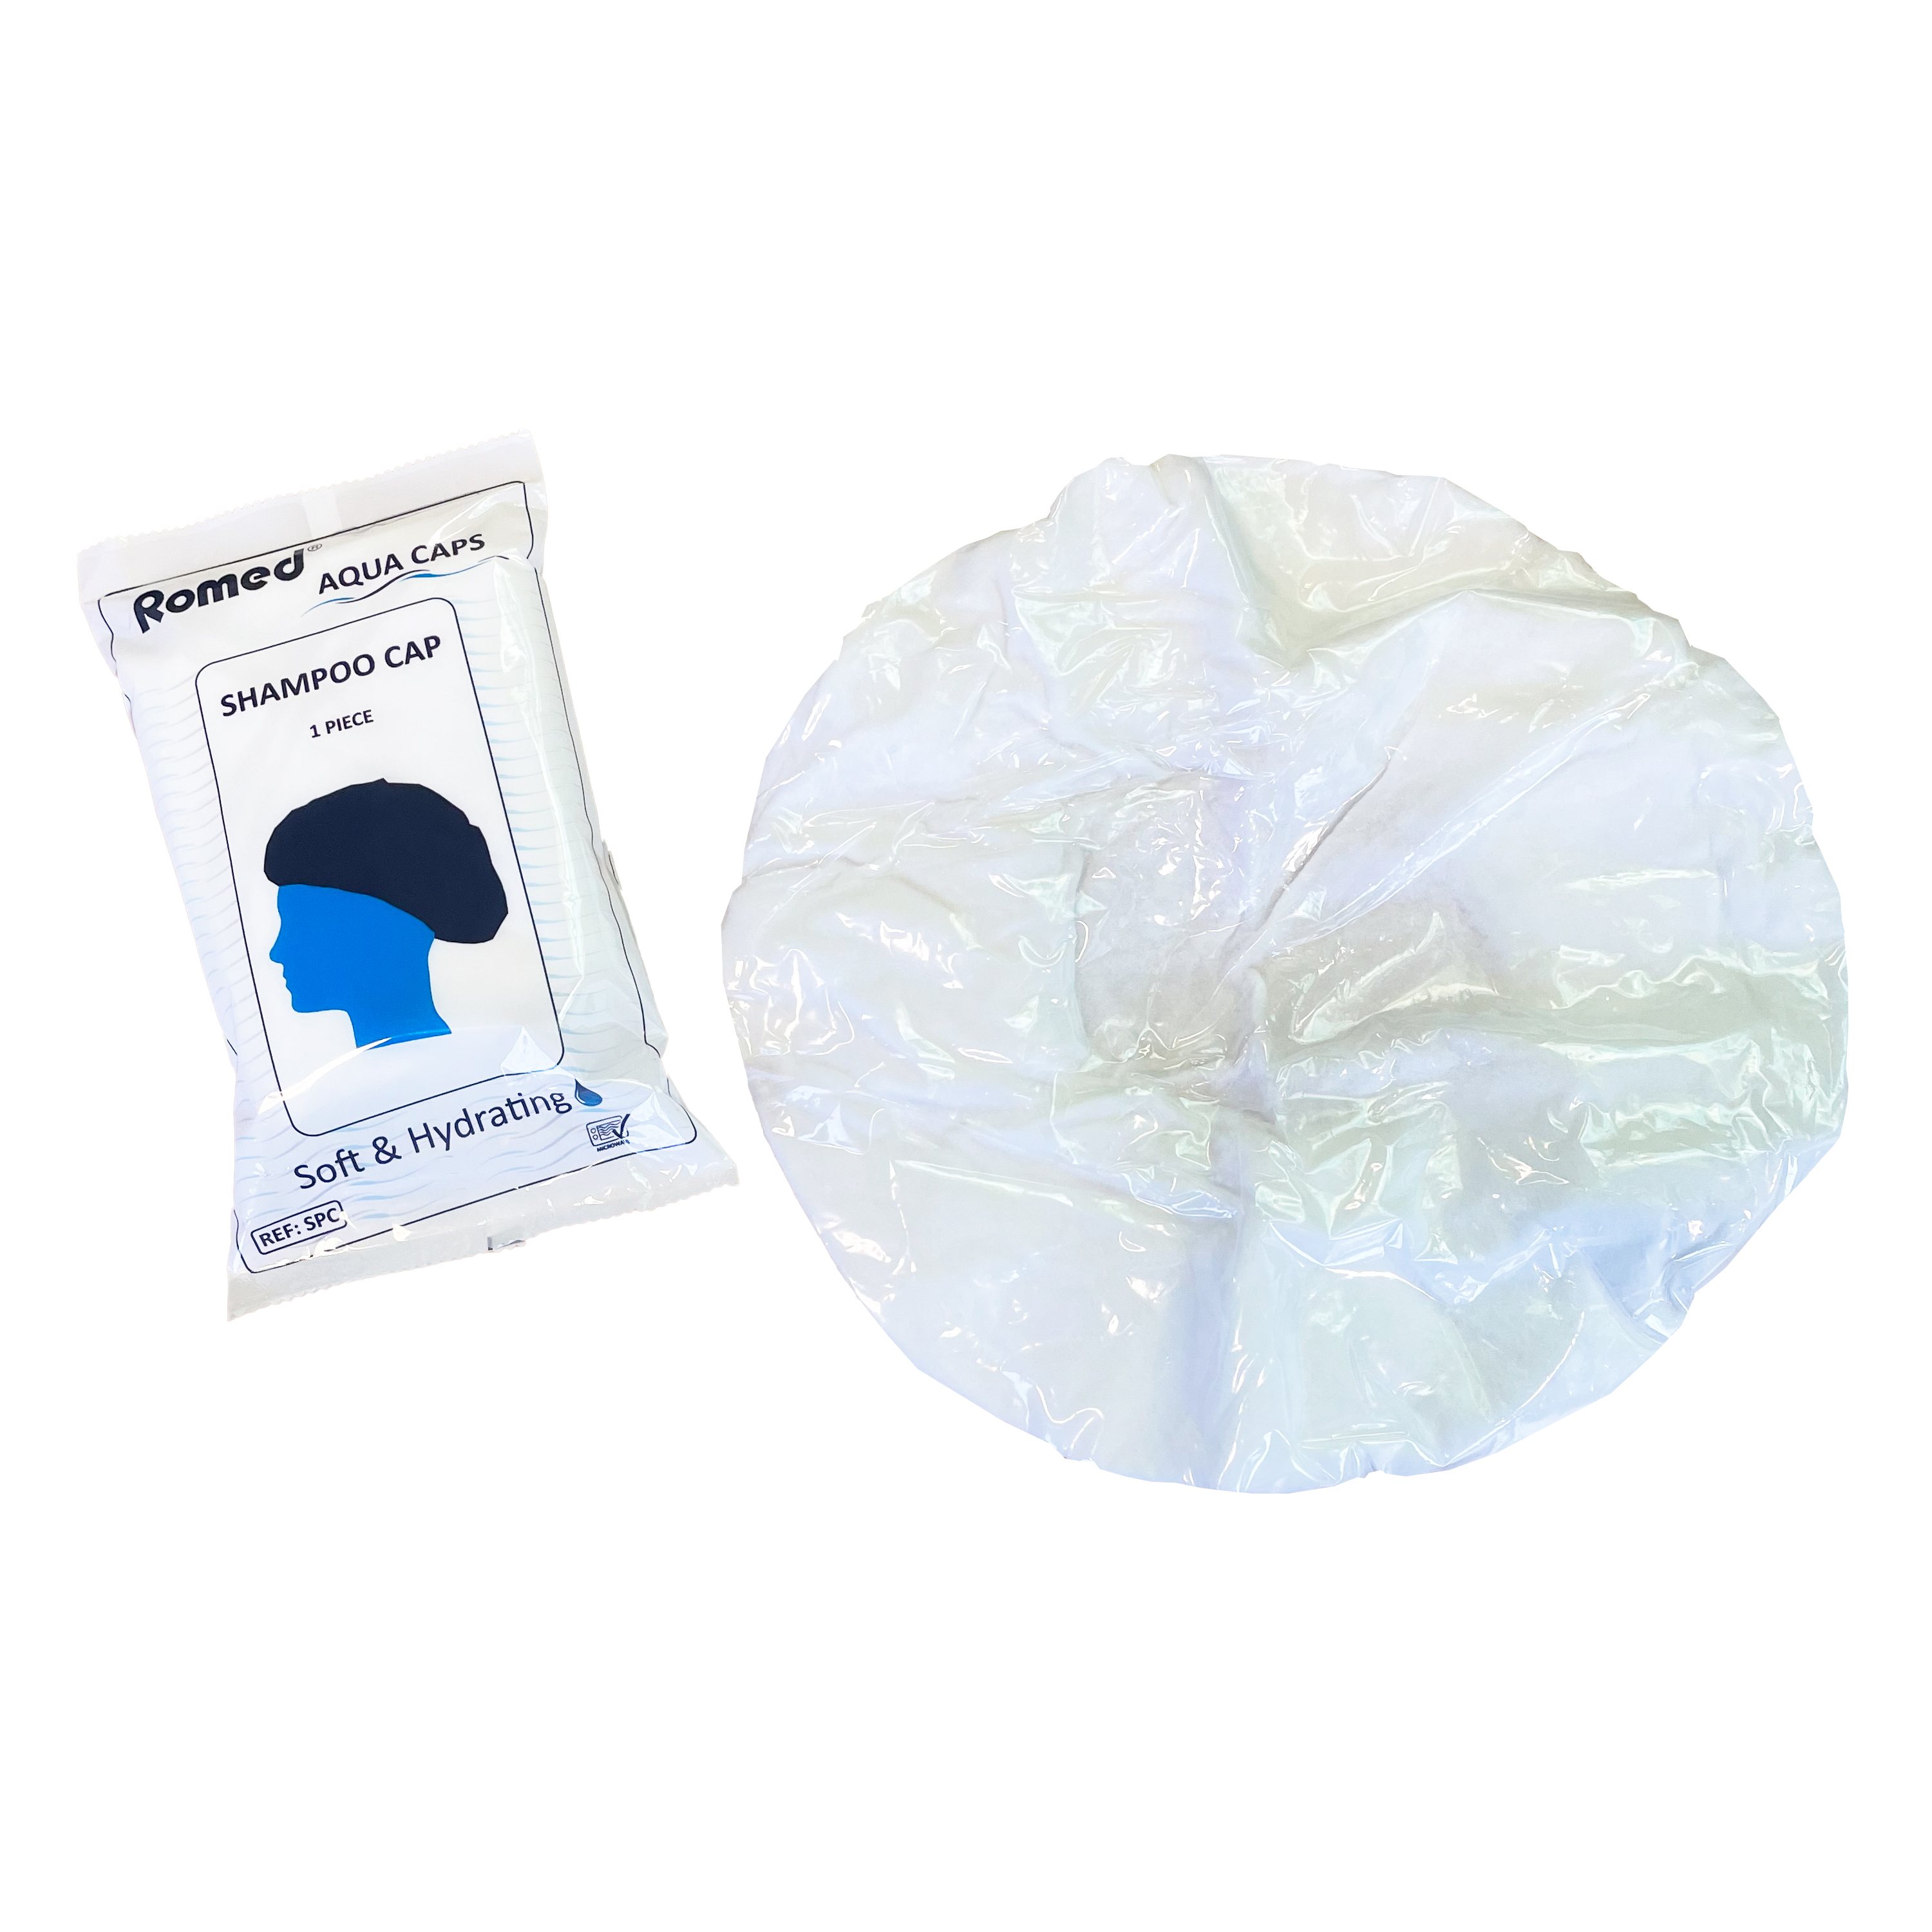 SPC Romed shampoo caps, pre-impregnated with shampoo, indivually packed, 24 dispenser bags in a carton.